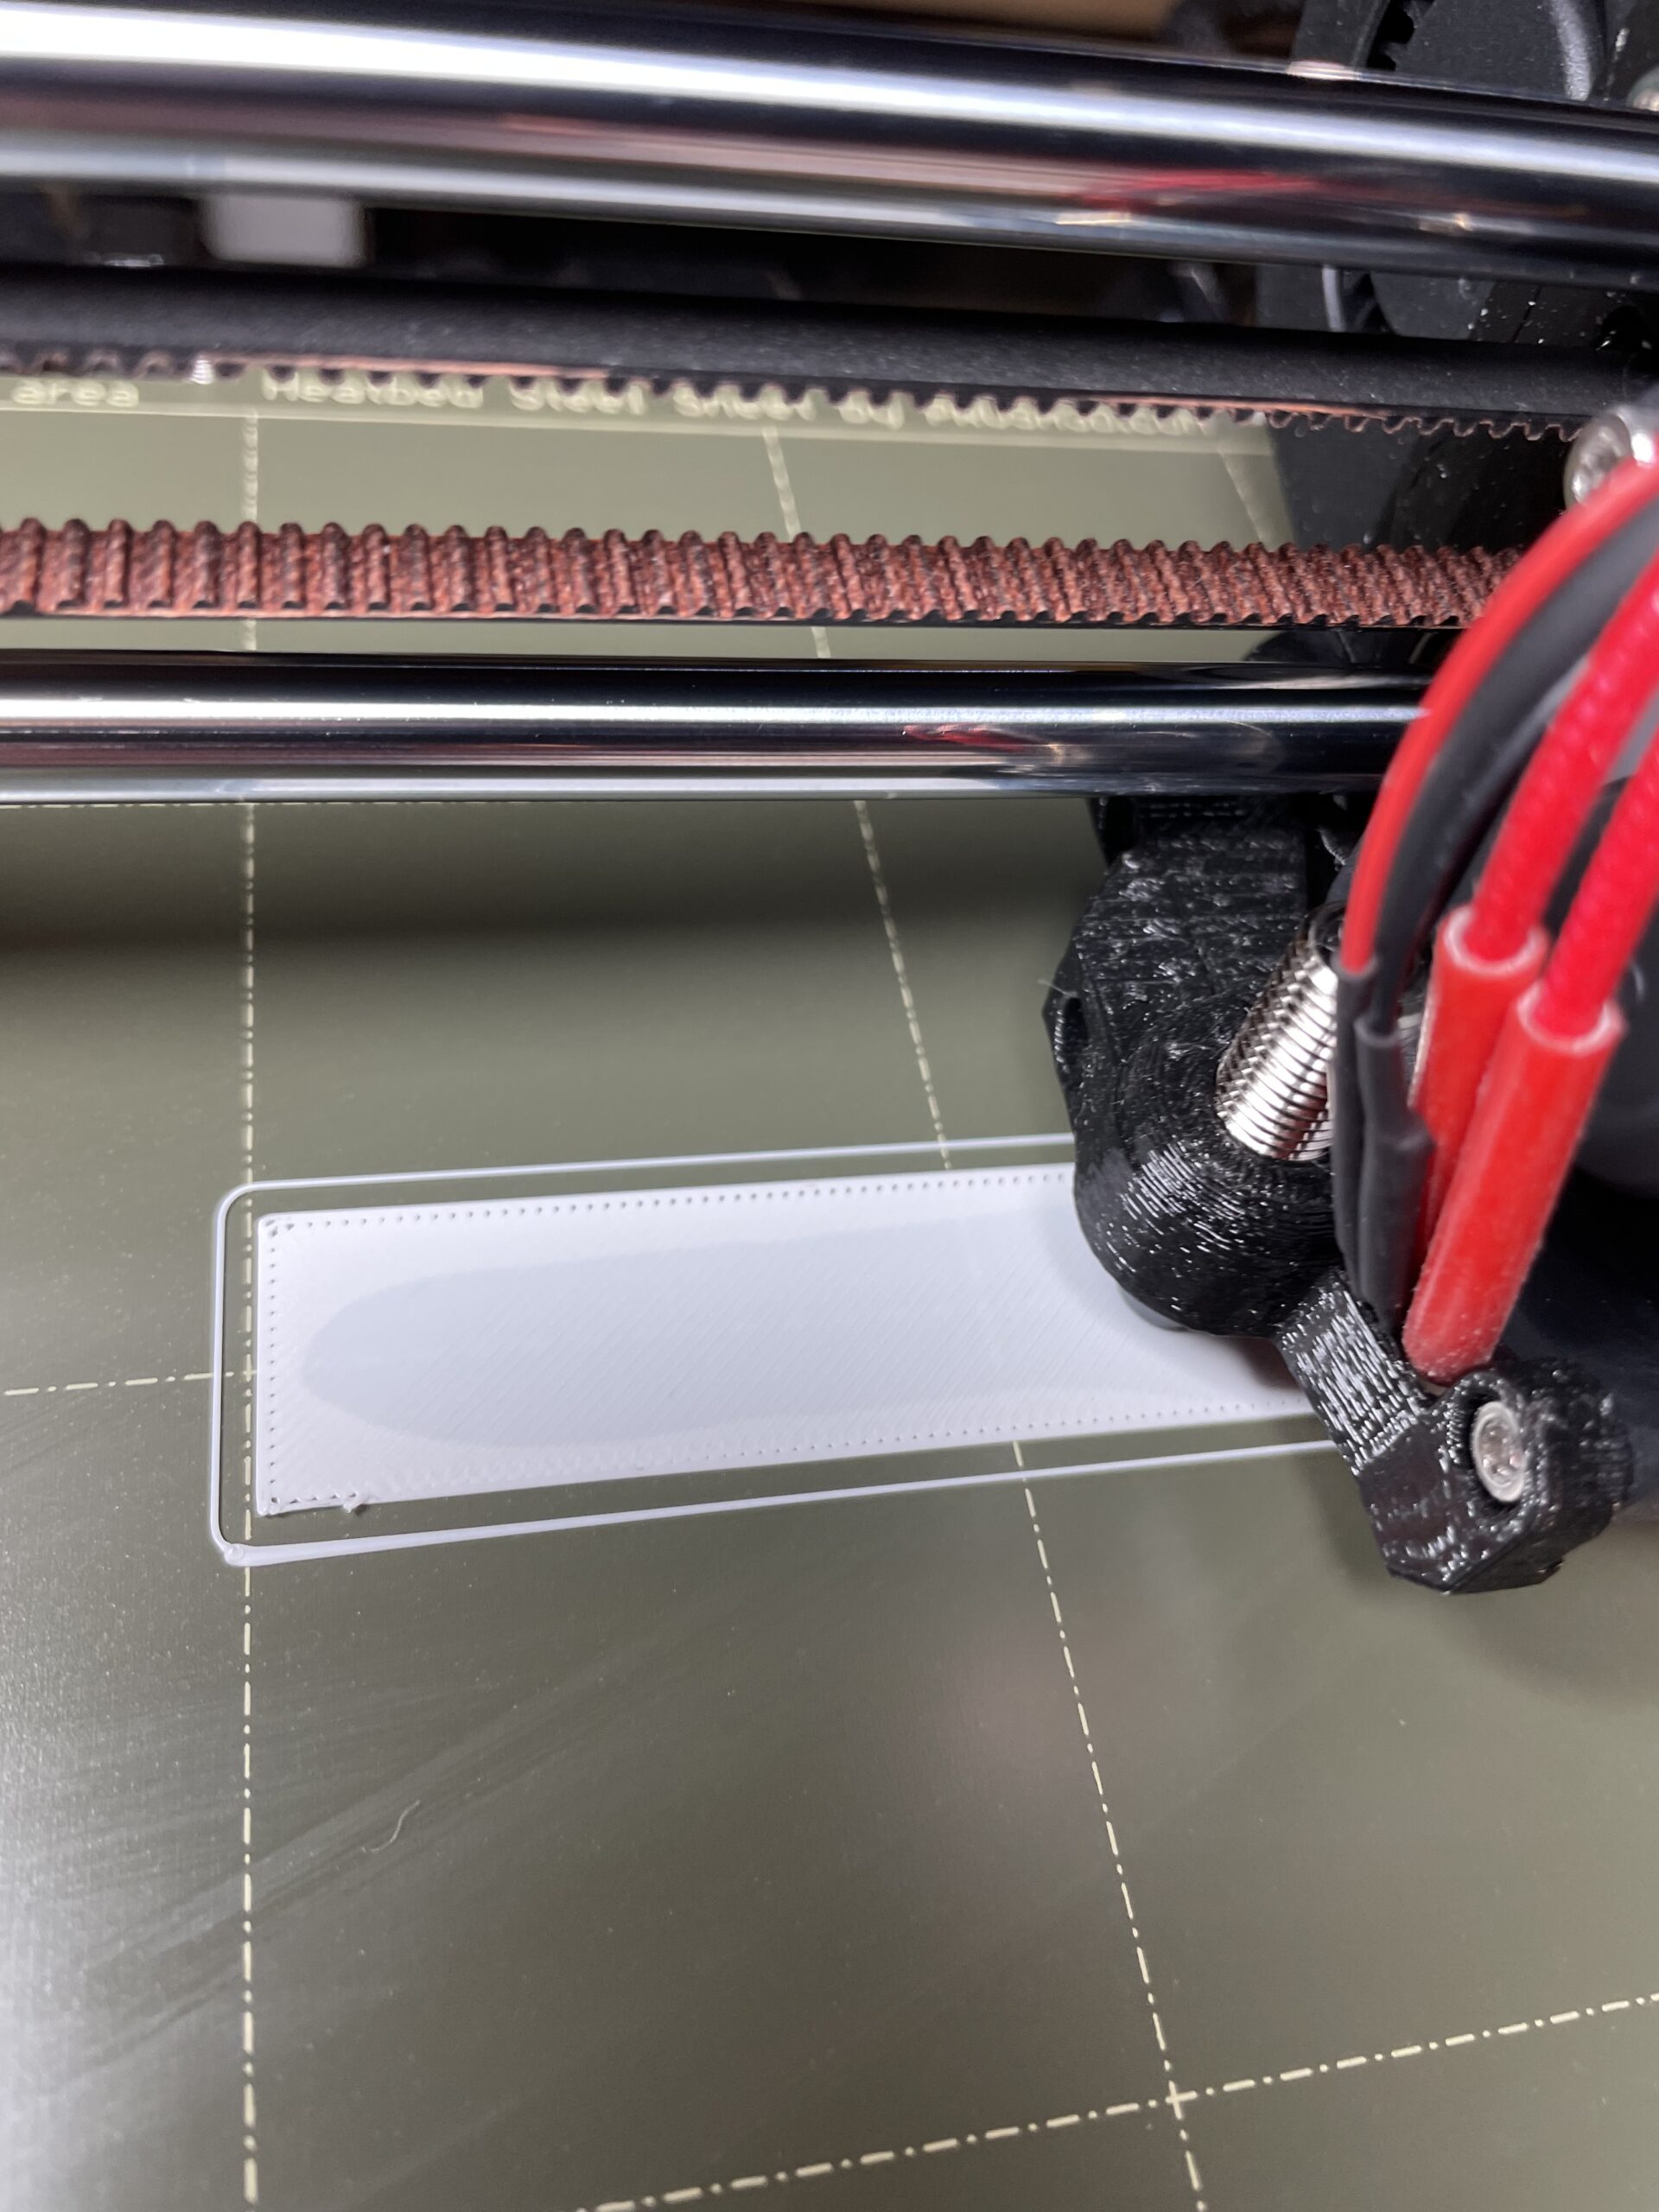 Why is PrusaSlicer adding this filament streak right in the middle of where  the print will go? – PrusaSlicer – Prusa3D Forum